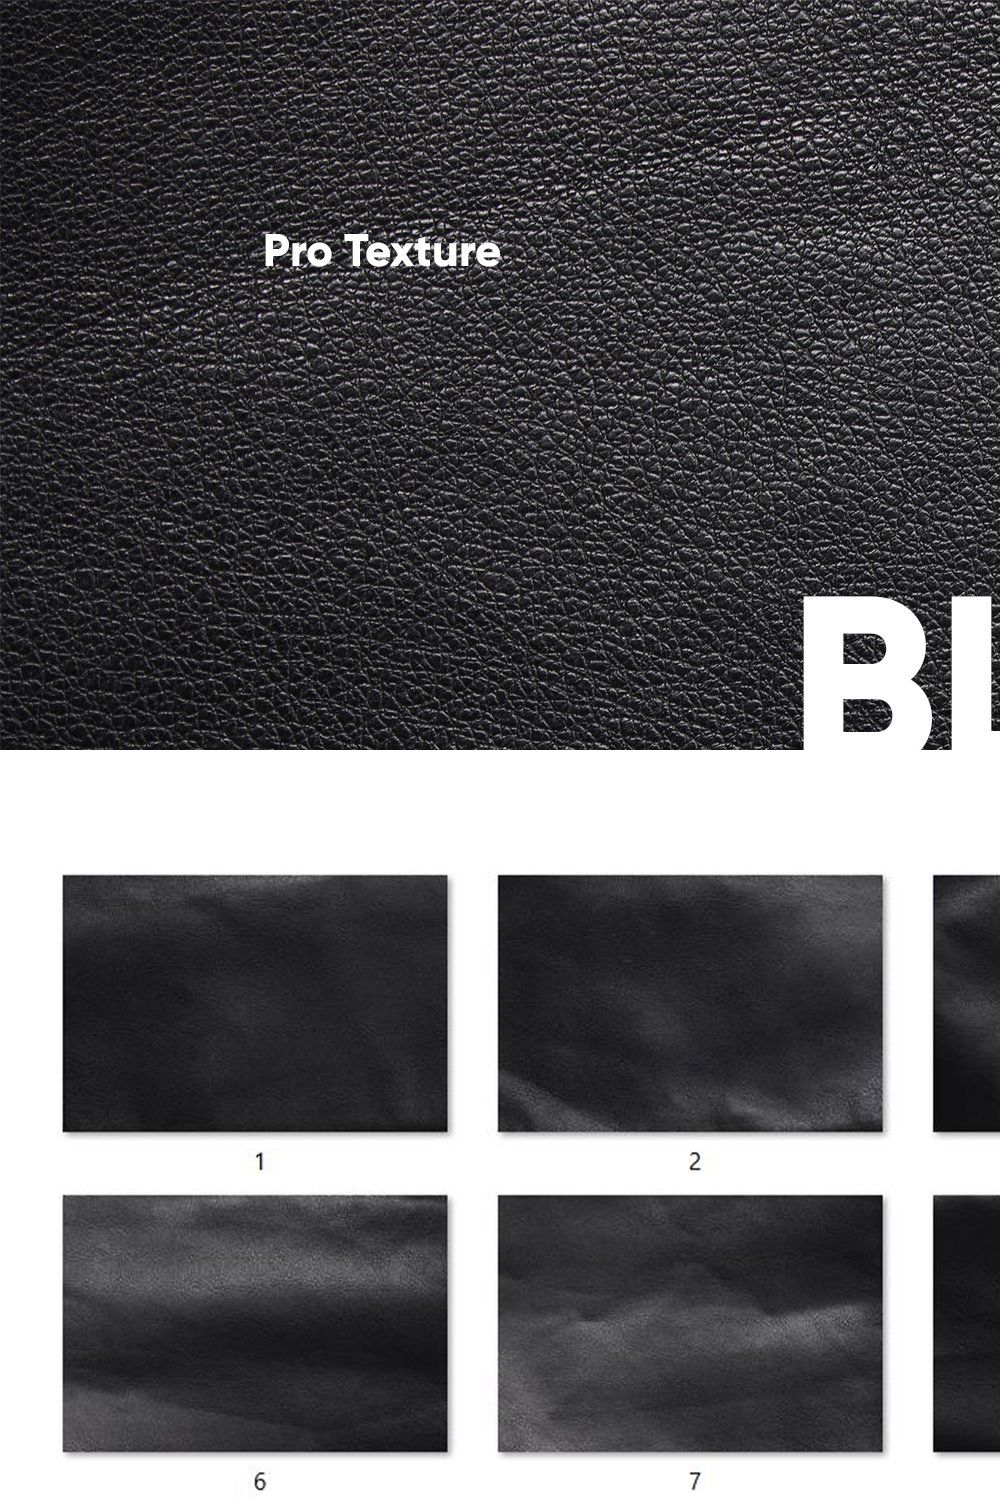 20 Black Leather Textures HQ pinterest preview image.